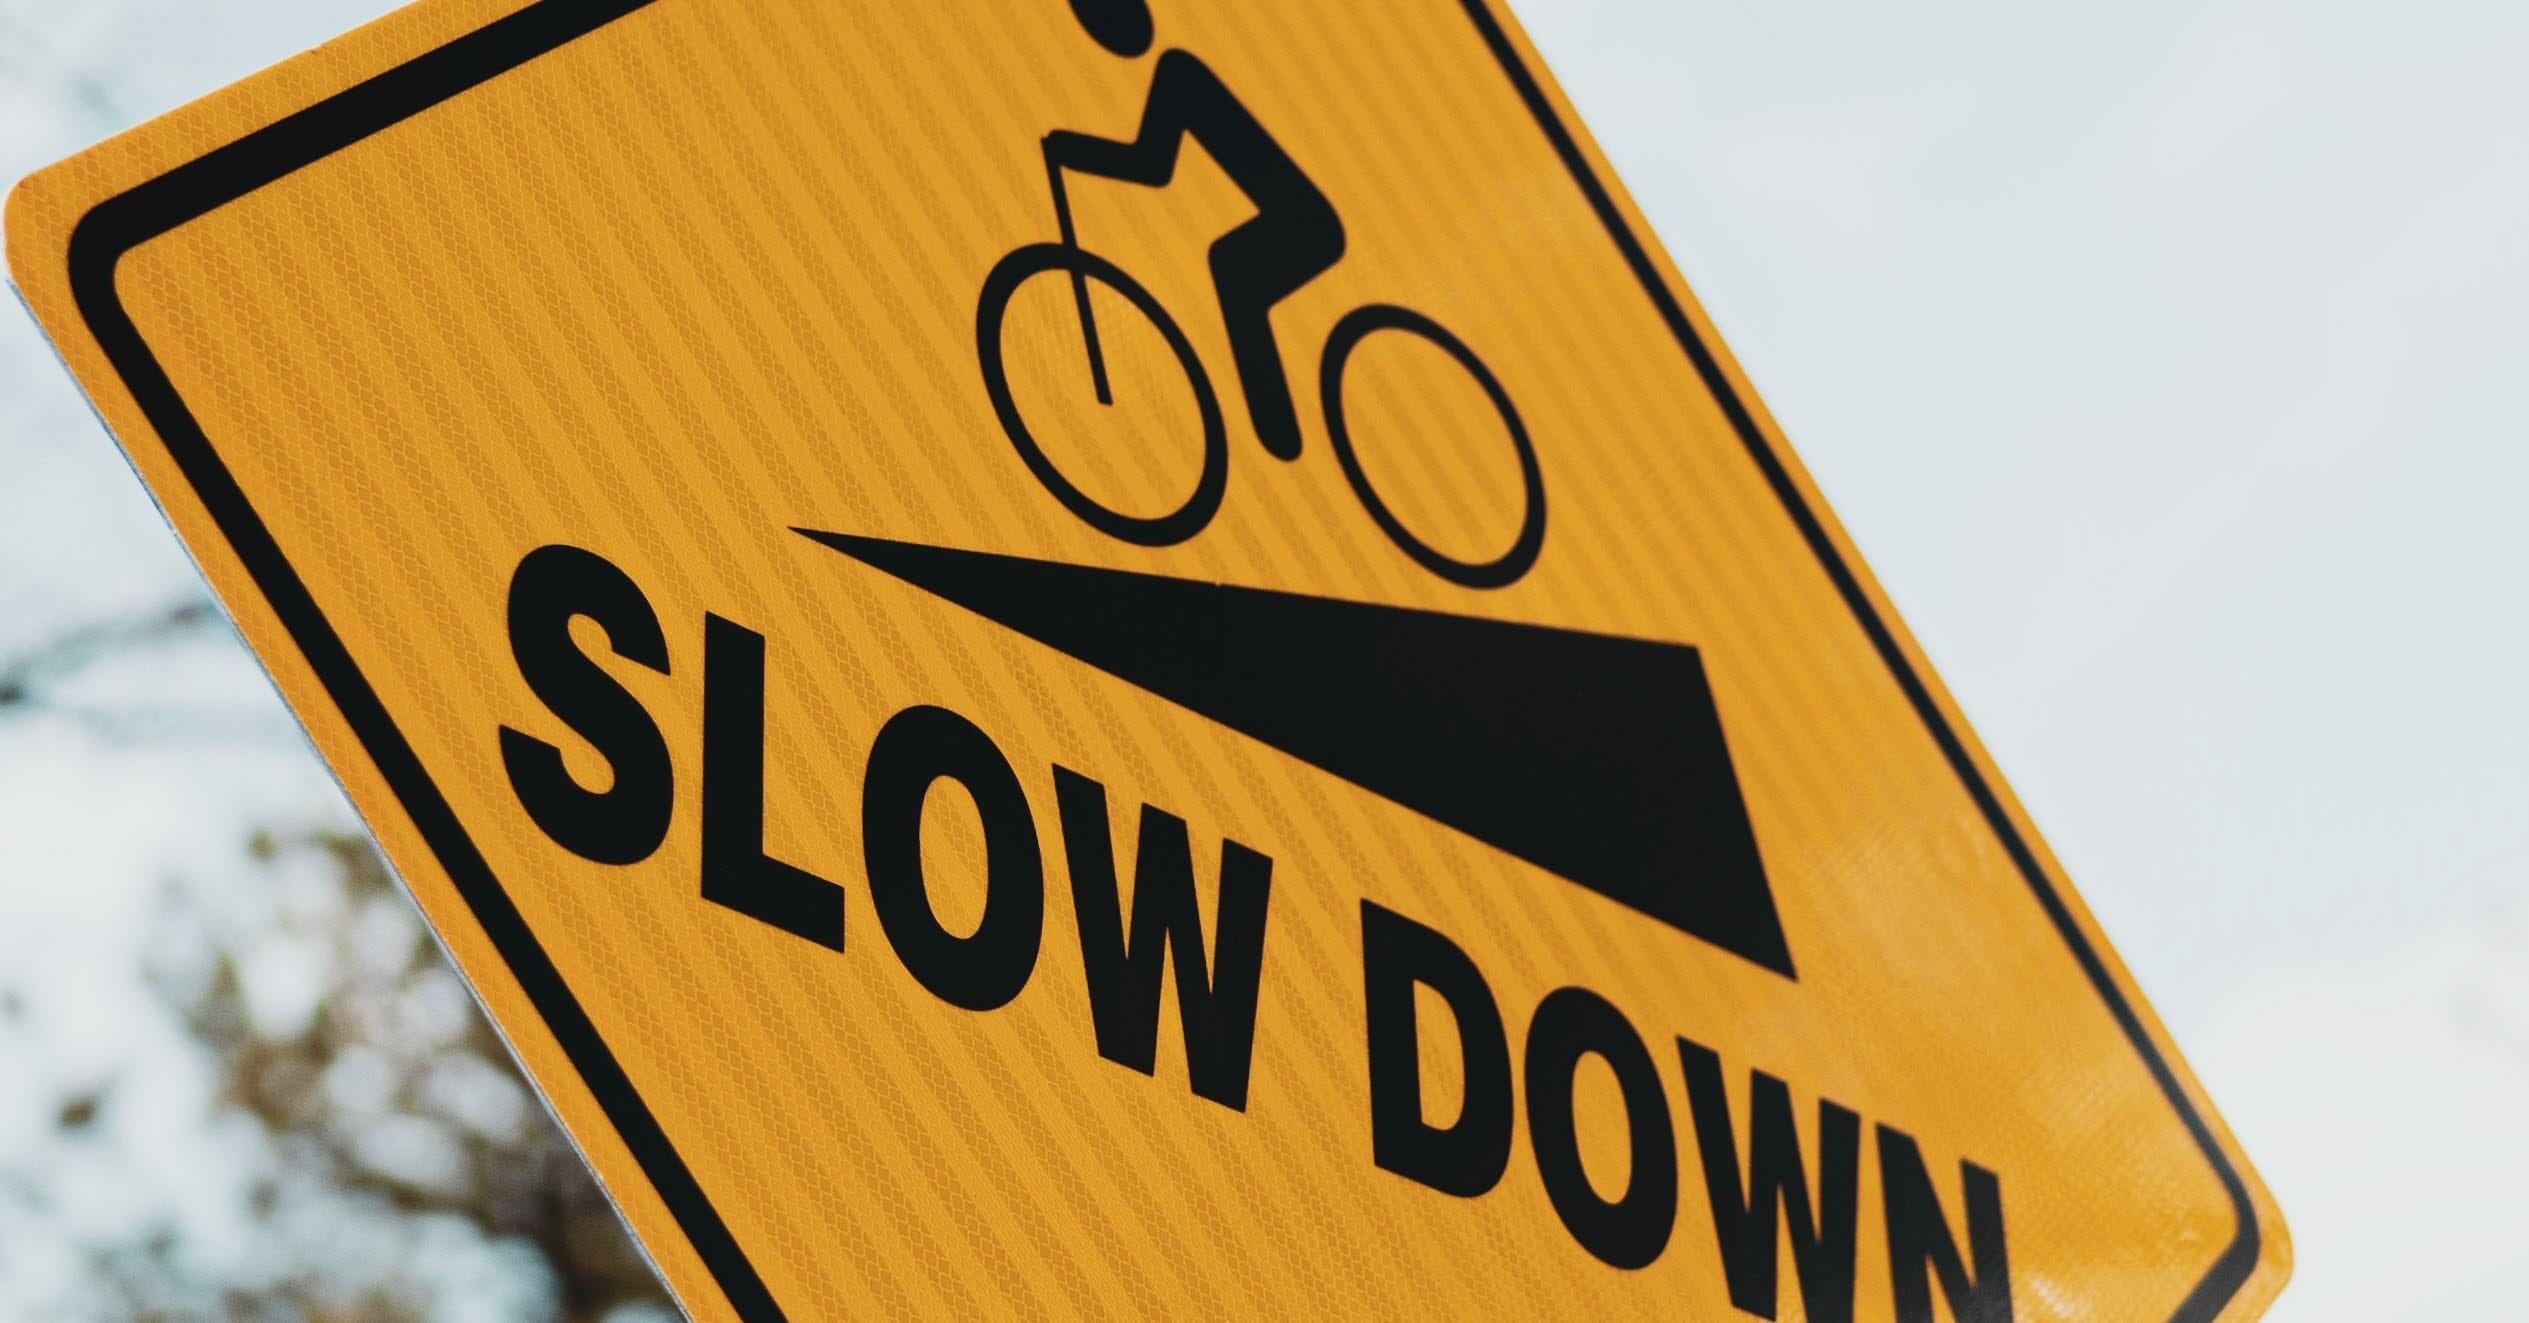 An image of a yellow sign that says SLOW DOWN and shows a person riding a bike down an incline